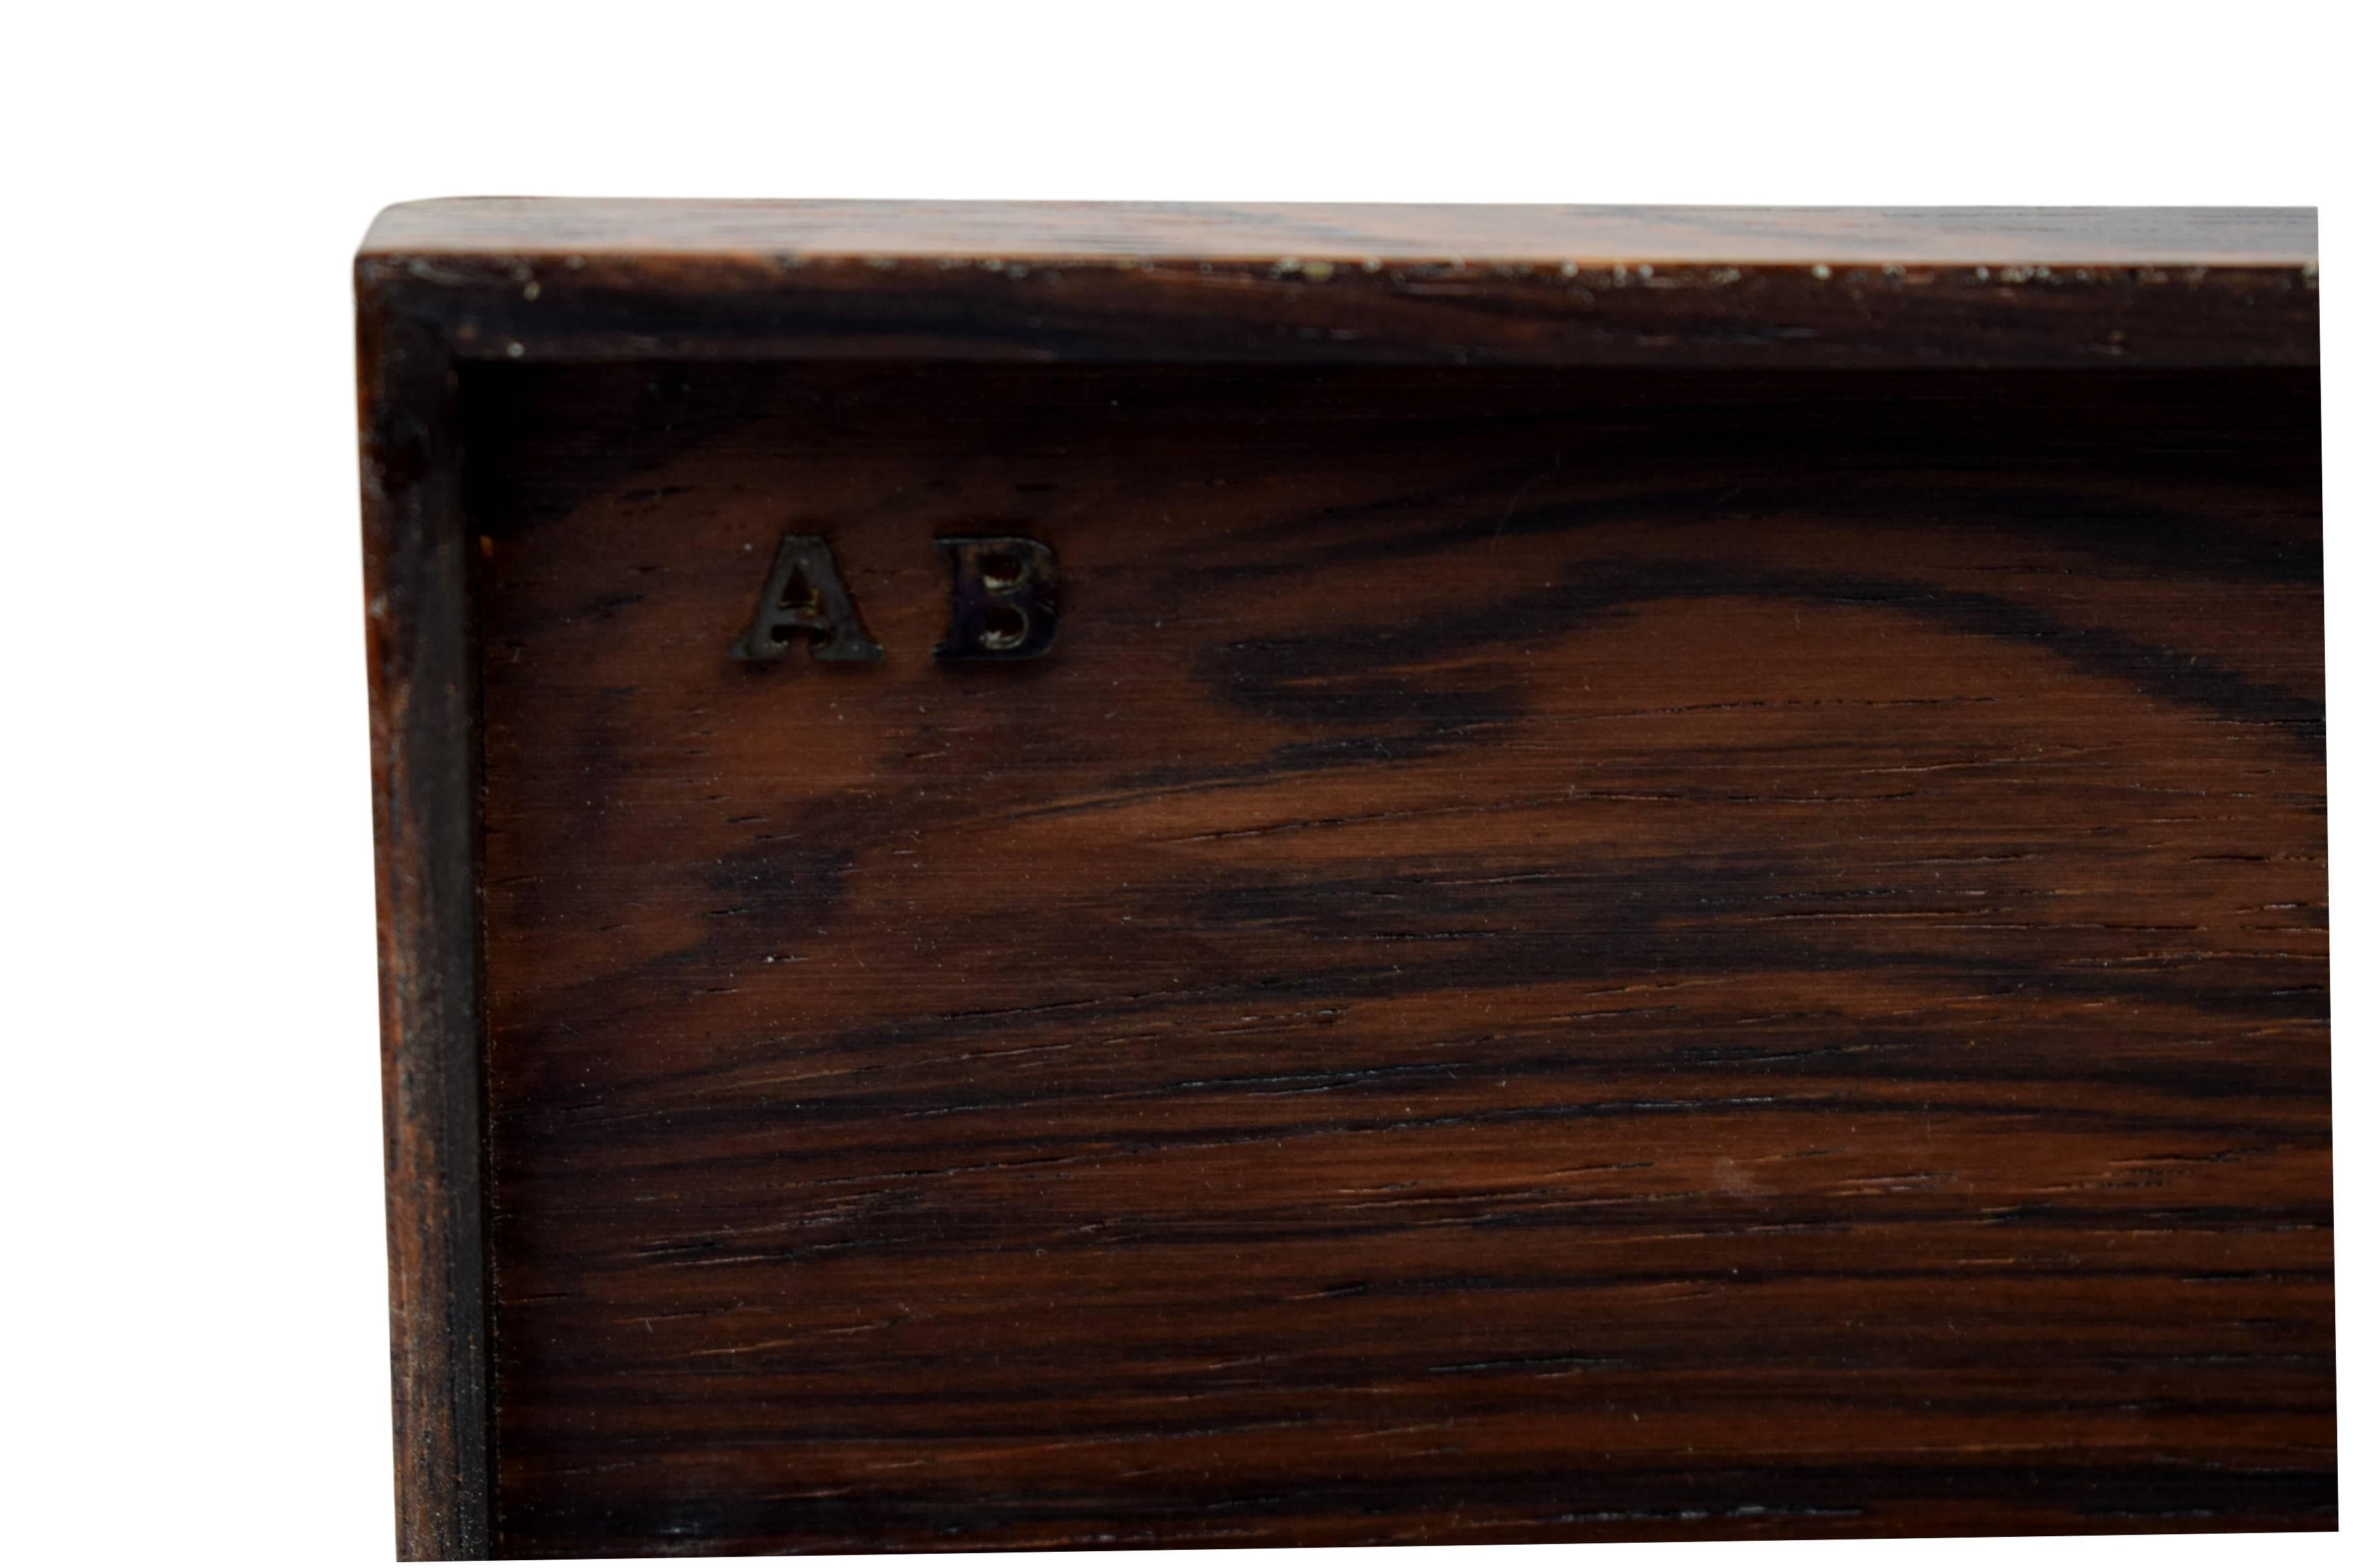 Danish Midcentury Rosewood Box with Sterling 925 Silver Inlays by Hans Hansen For Sale 1